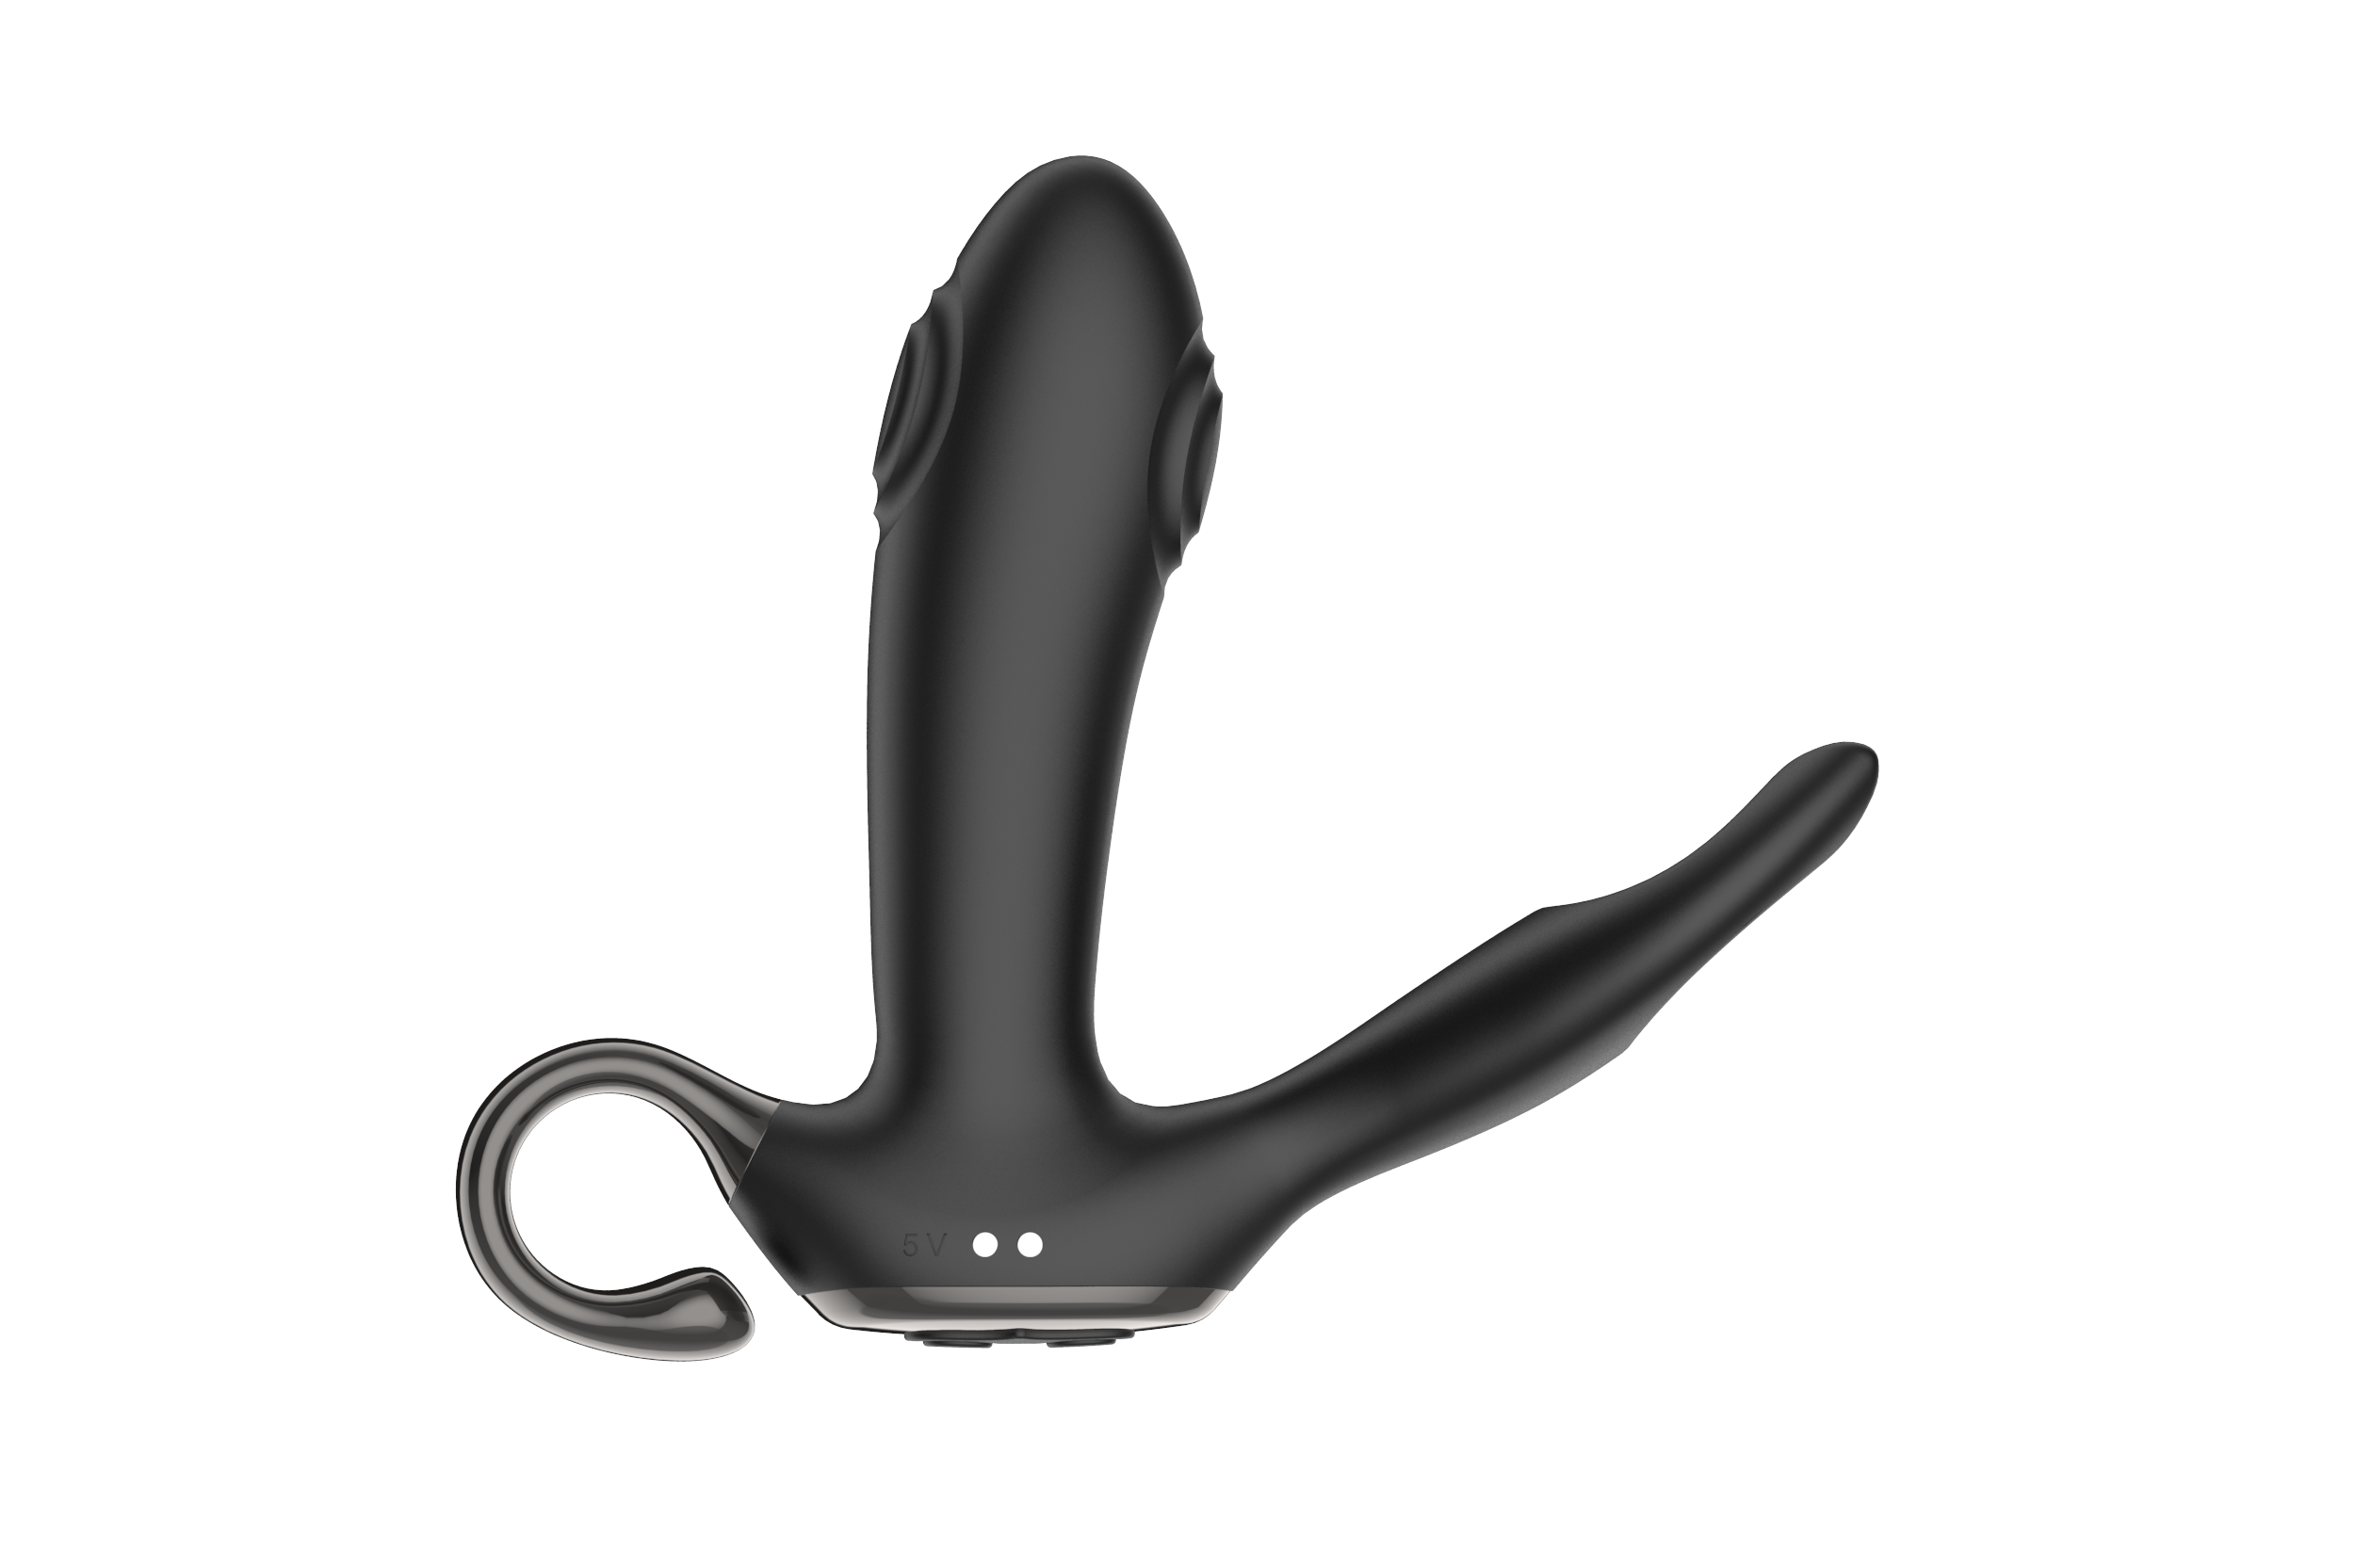 Tapping Prostate Massager - Vibrating & Hooked